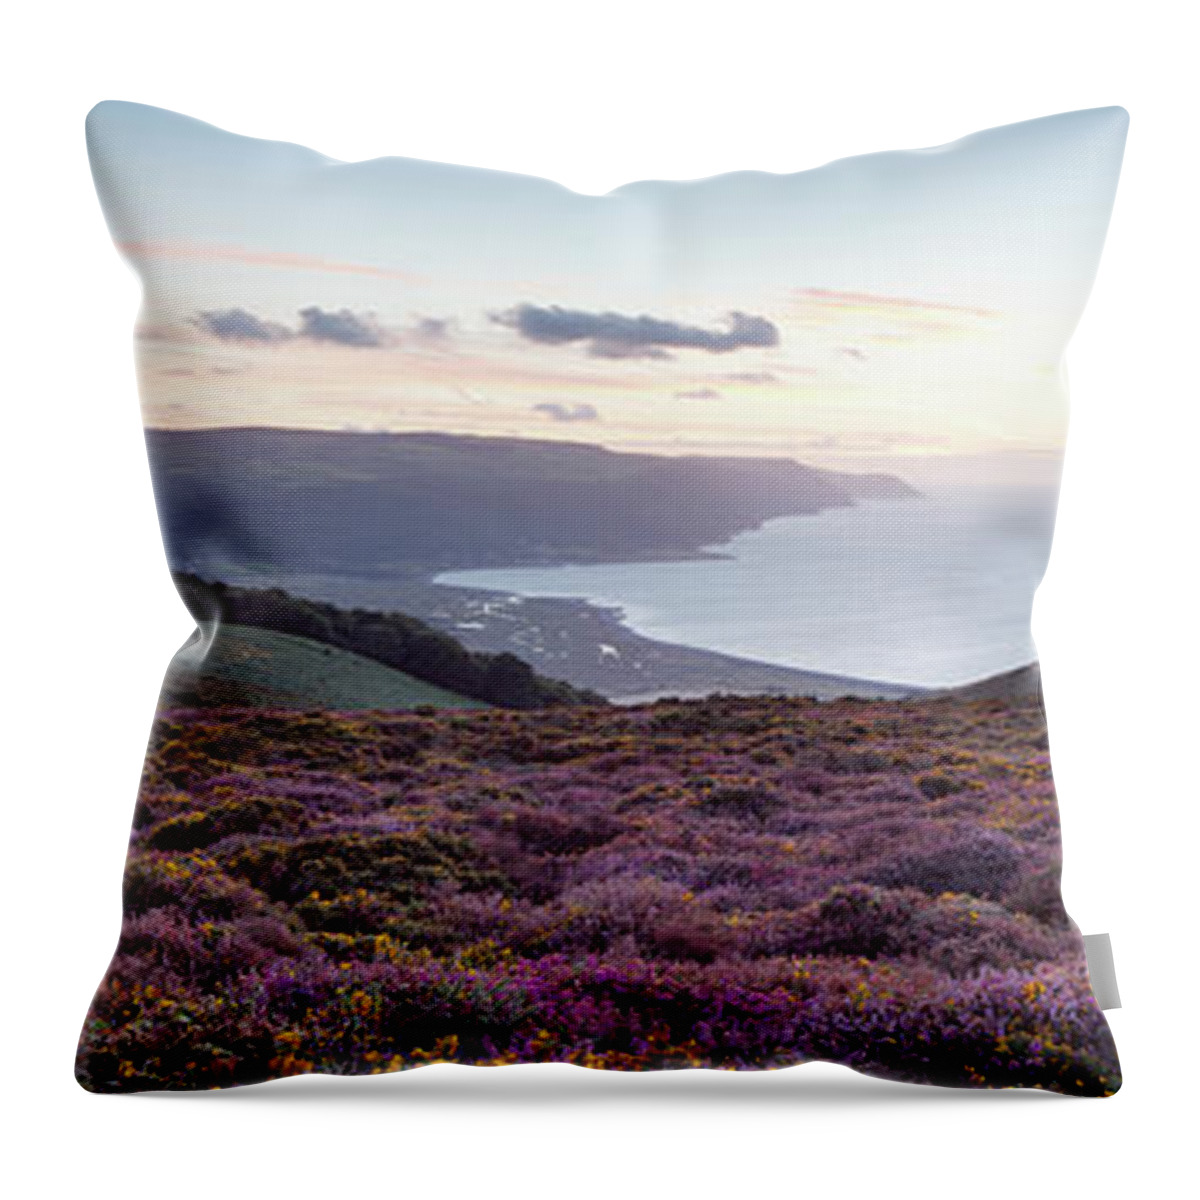 Tranquility Throw Pillow featuring the photograph Exmoor Coast by James Osmond